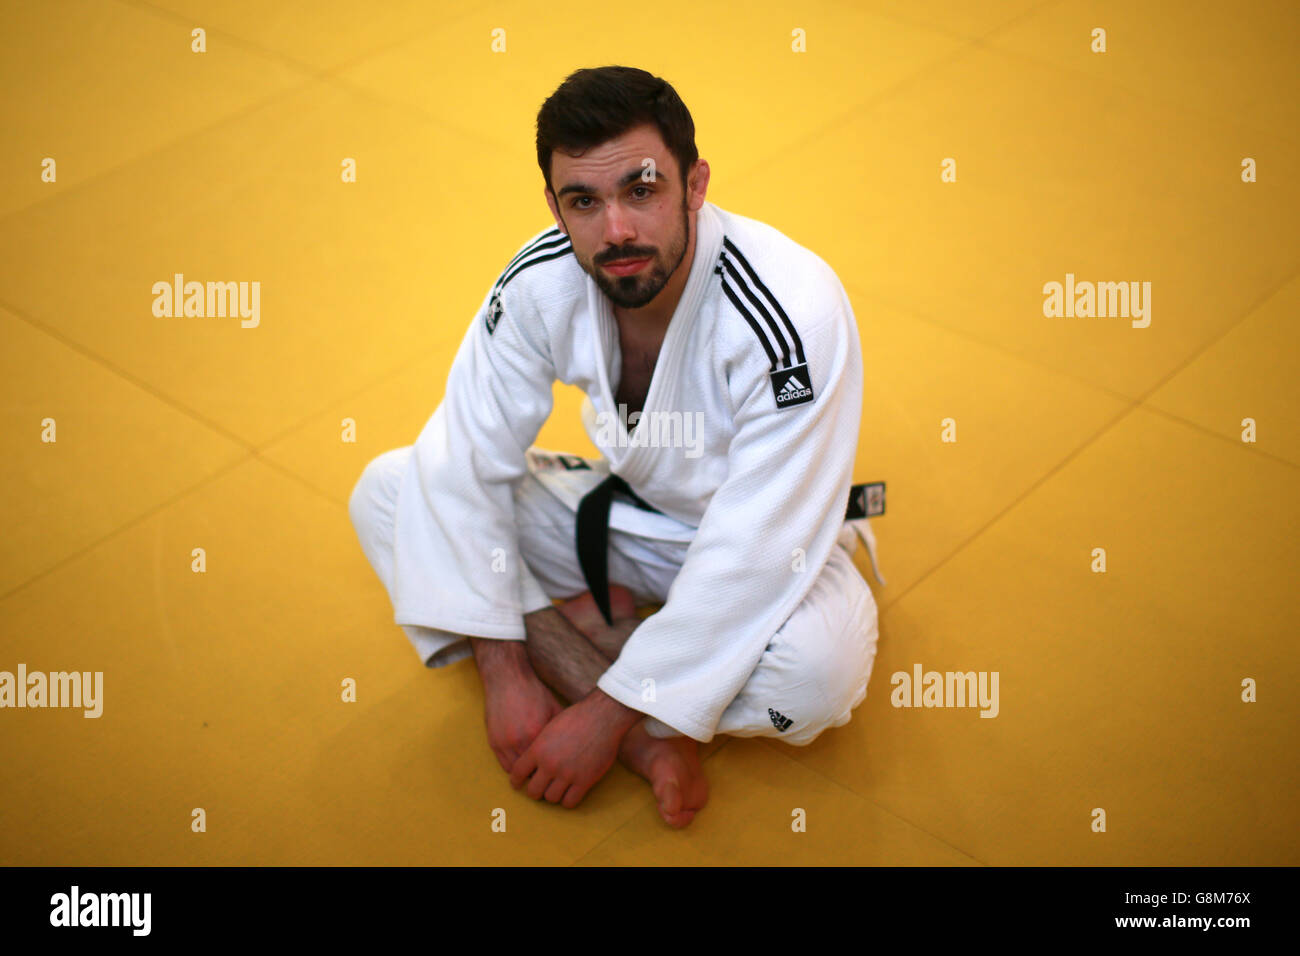 Jonathan Drane during the announcement of the Rio 2016 Paralympics Judo squad at the University of Wolverhampton, Walsall. PRESS ASSOCIATION Photo. Picture date: Thursday February 11, 2016. See PA story: PARALYMPICS Judo. Photo credit should read: David Davies/PA Wire. Stock Photo